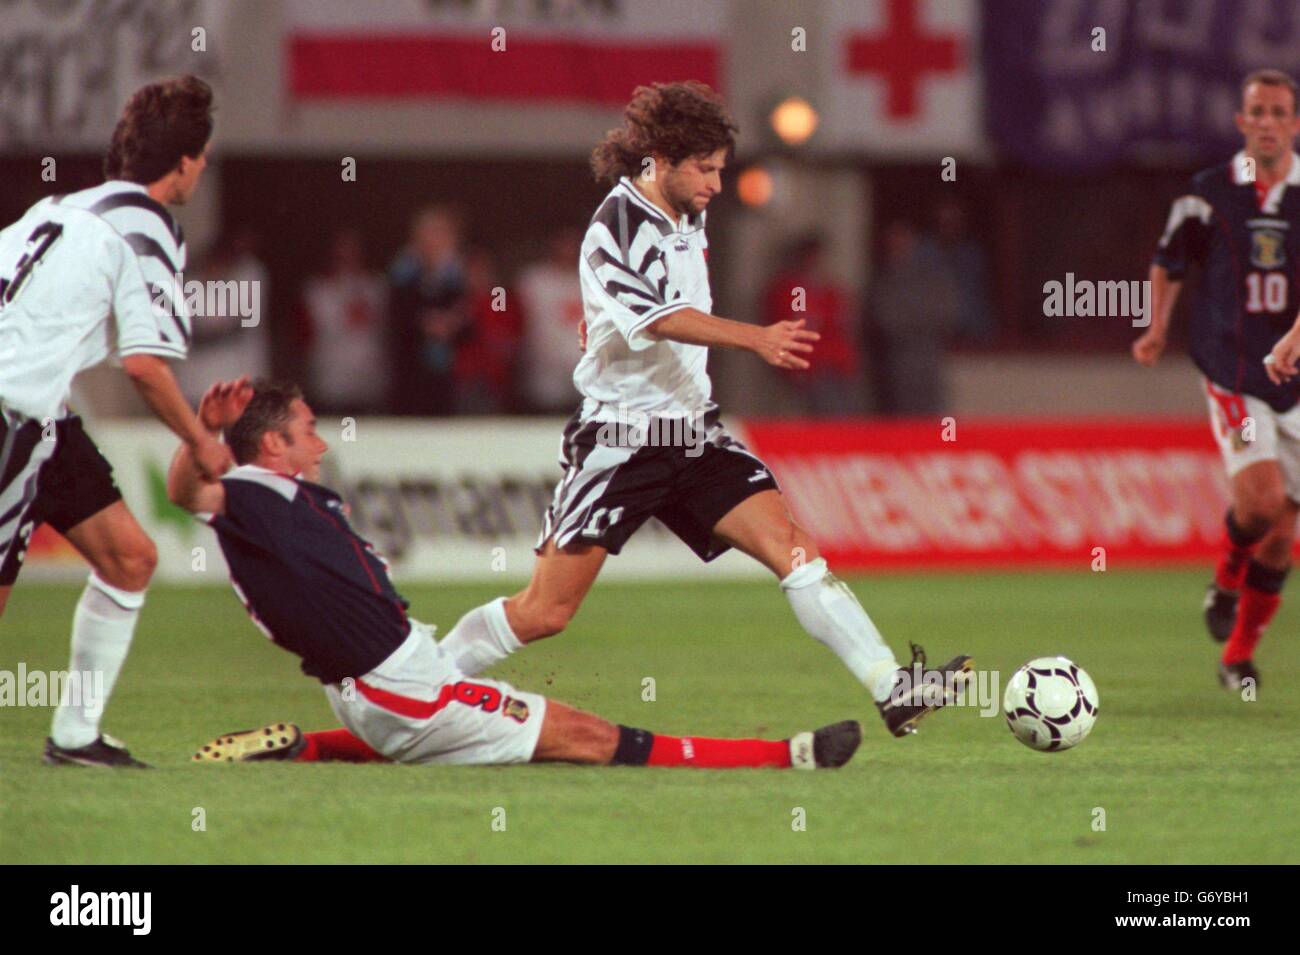 Soccer - World Cup Qualifier - Austria v Scotland. Wolfgang Feiersinger of Austria (right) dodges a tackle from Ally McCoist of Scotland (left) Stock Photo